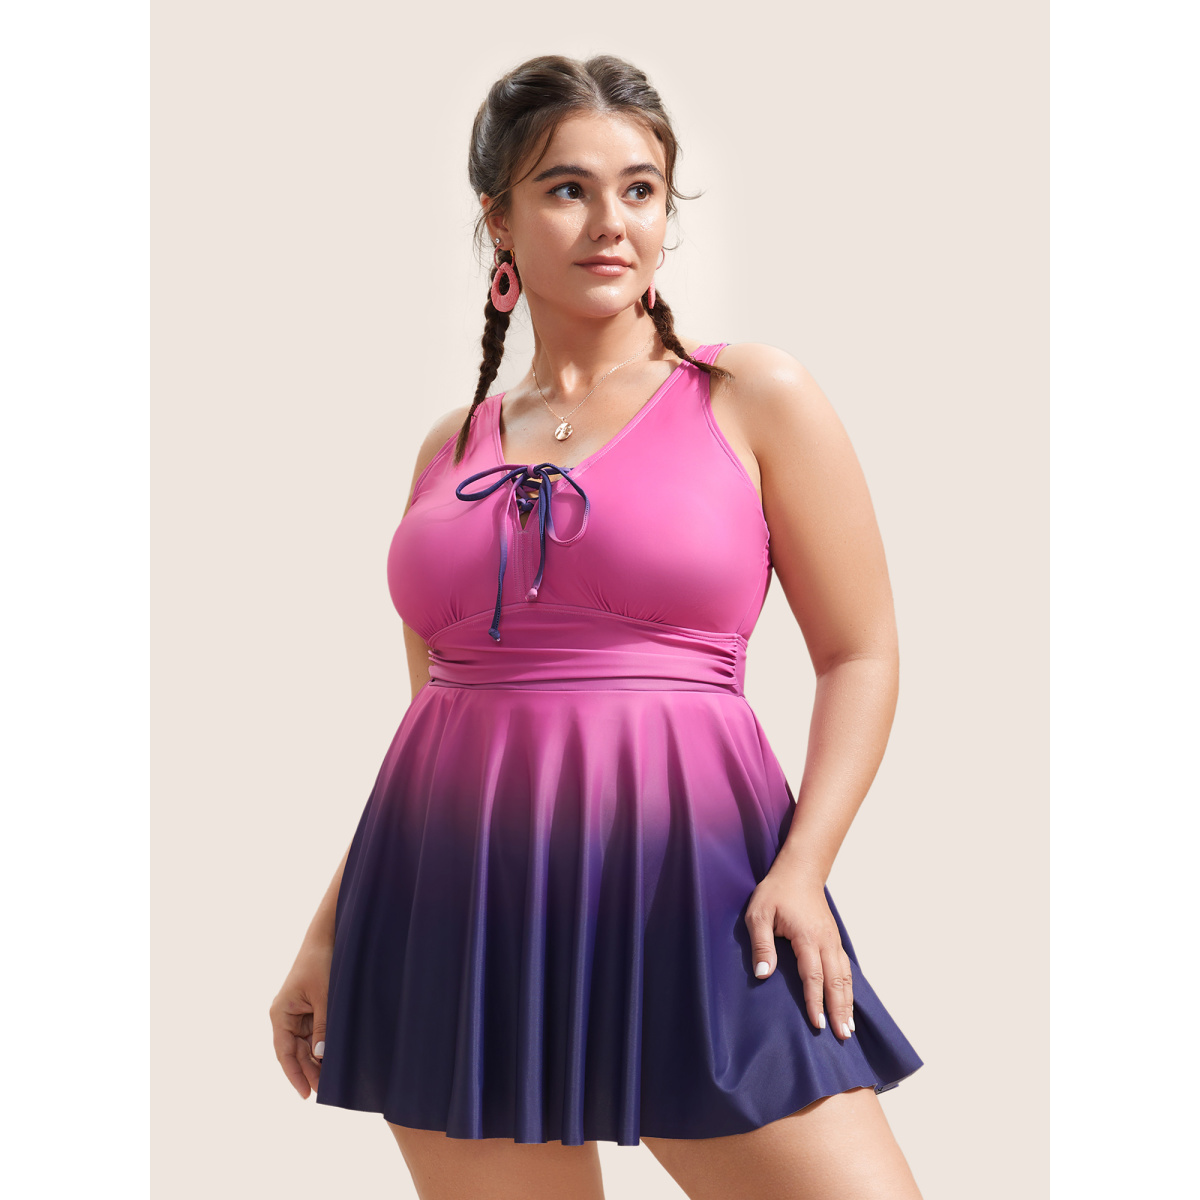 

Plus Size Ombre Contrast Ruched Lace Up Swim Dress Women's Swimwear RedViolet Beach Bodycon V-neck High stretch Curve Swim Dresses BloomChic